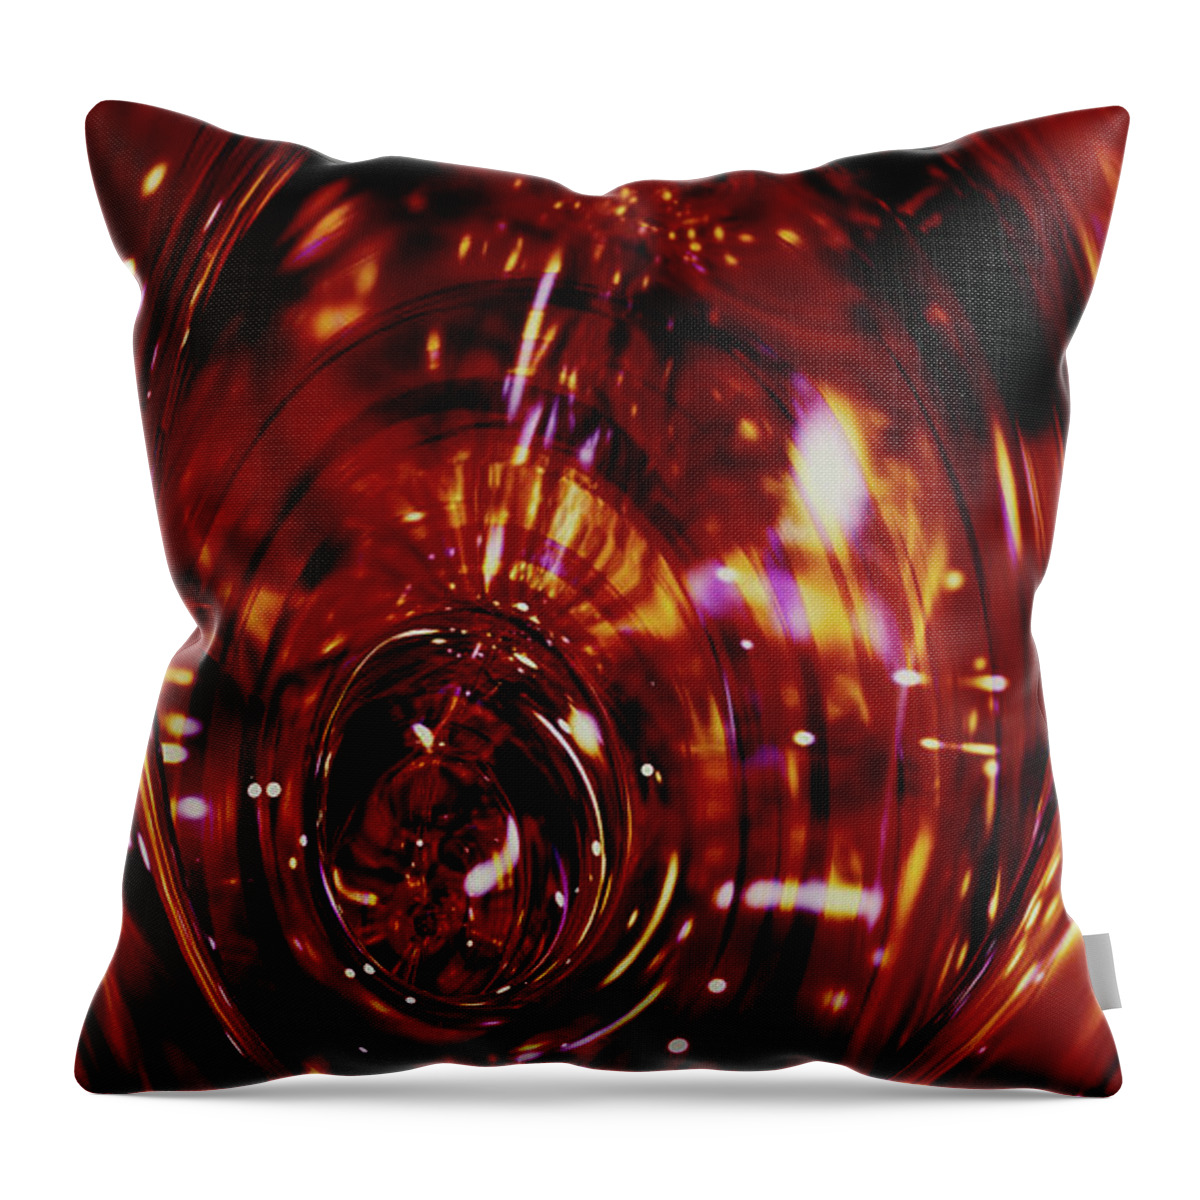 Red Throw Pillow featuring the digital art Red Inside by Matthew Lindley